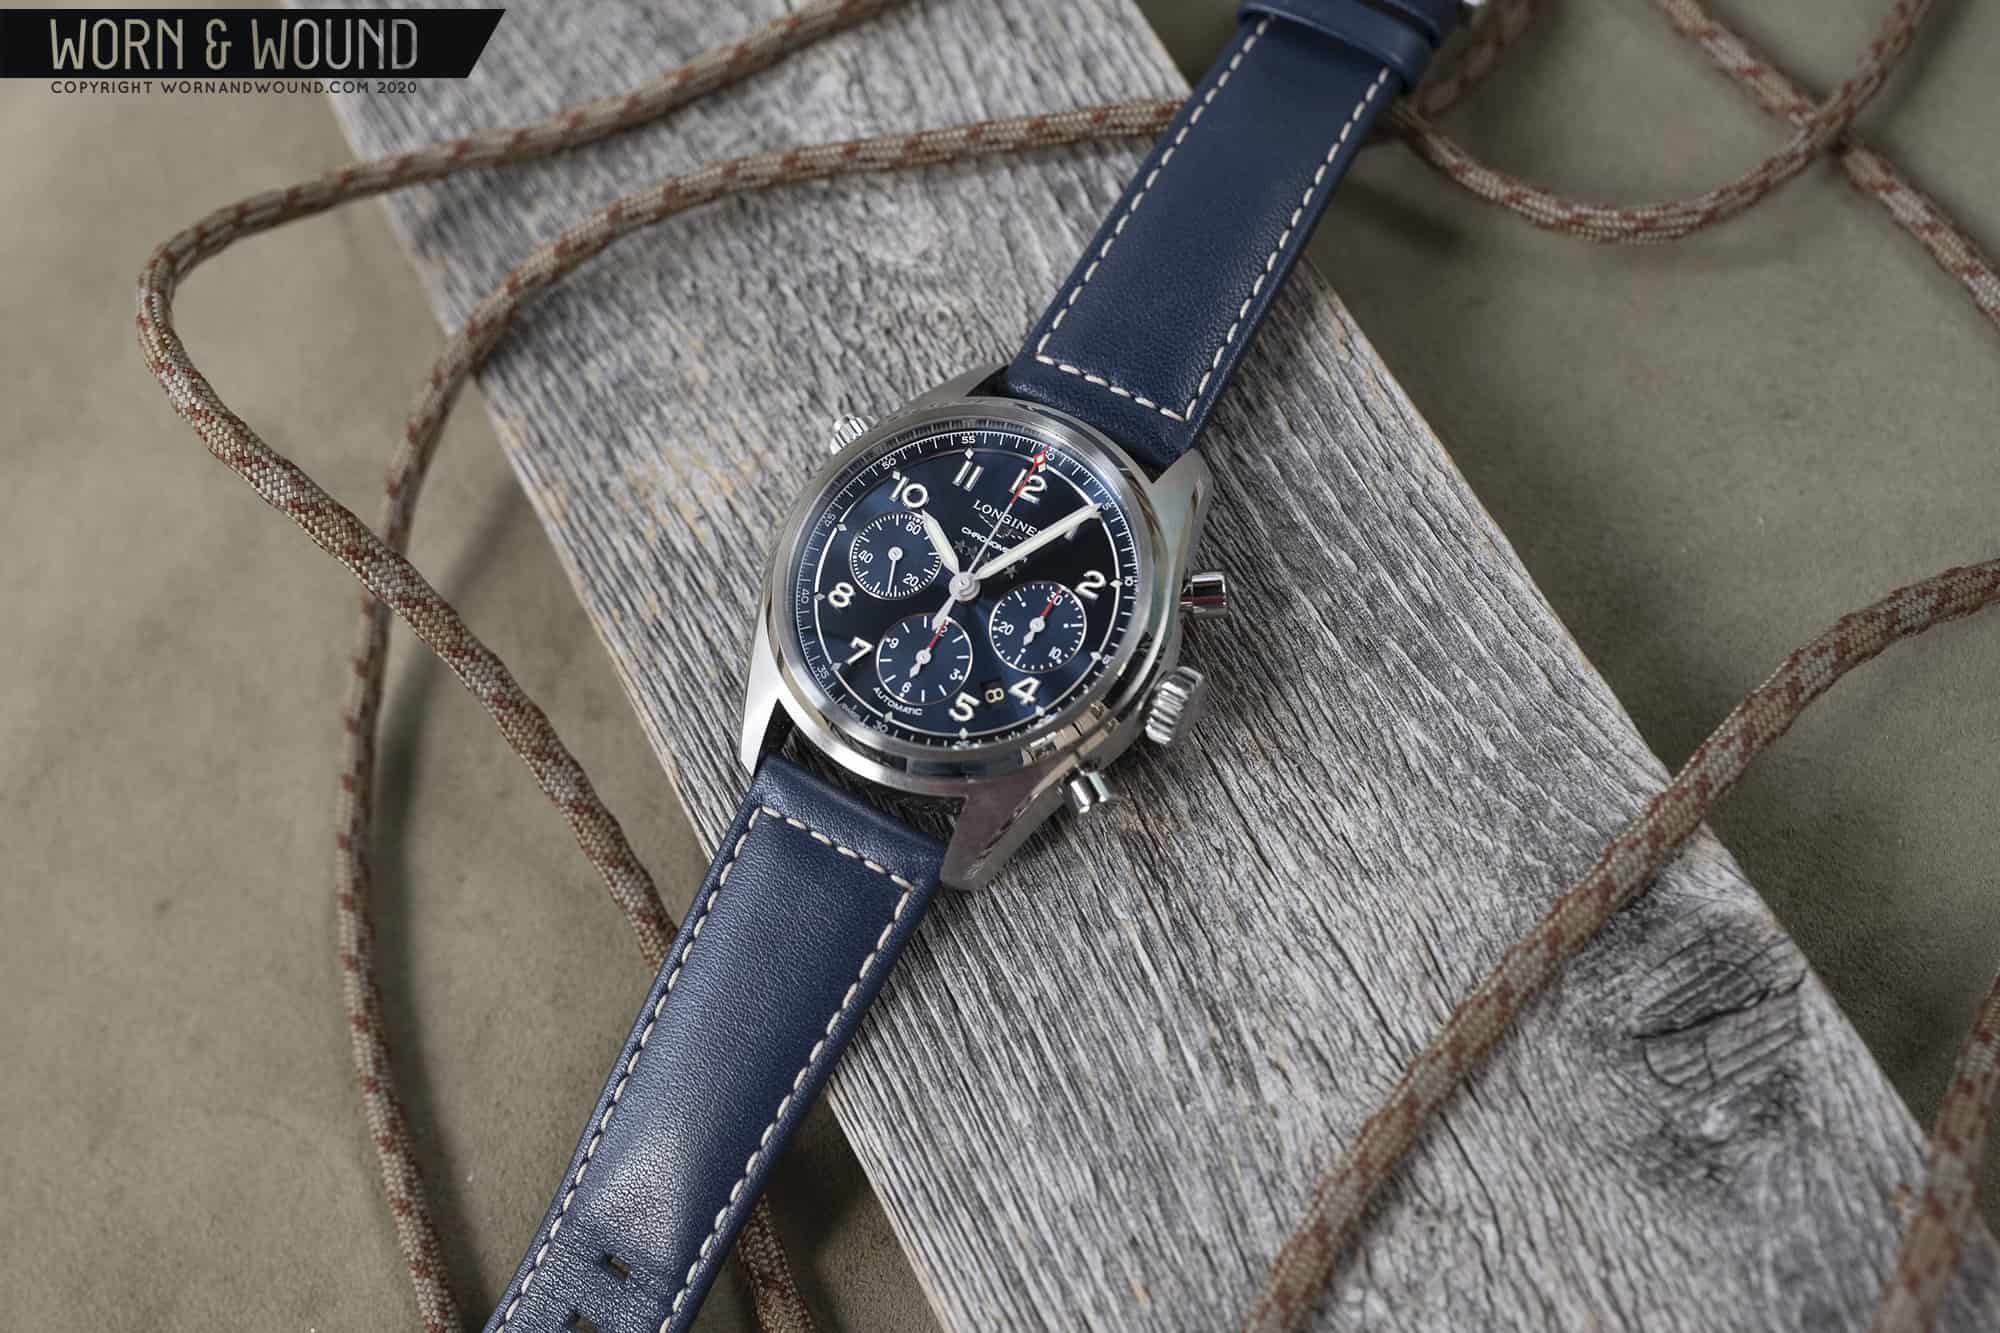 Hands-On With The Longines Spirit Chronograph - Worn & Wound